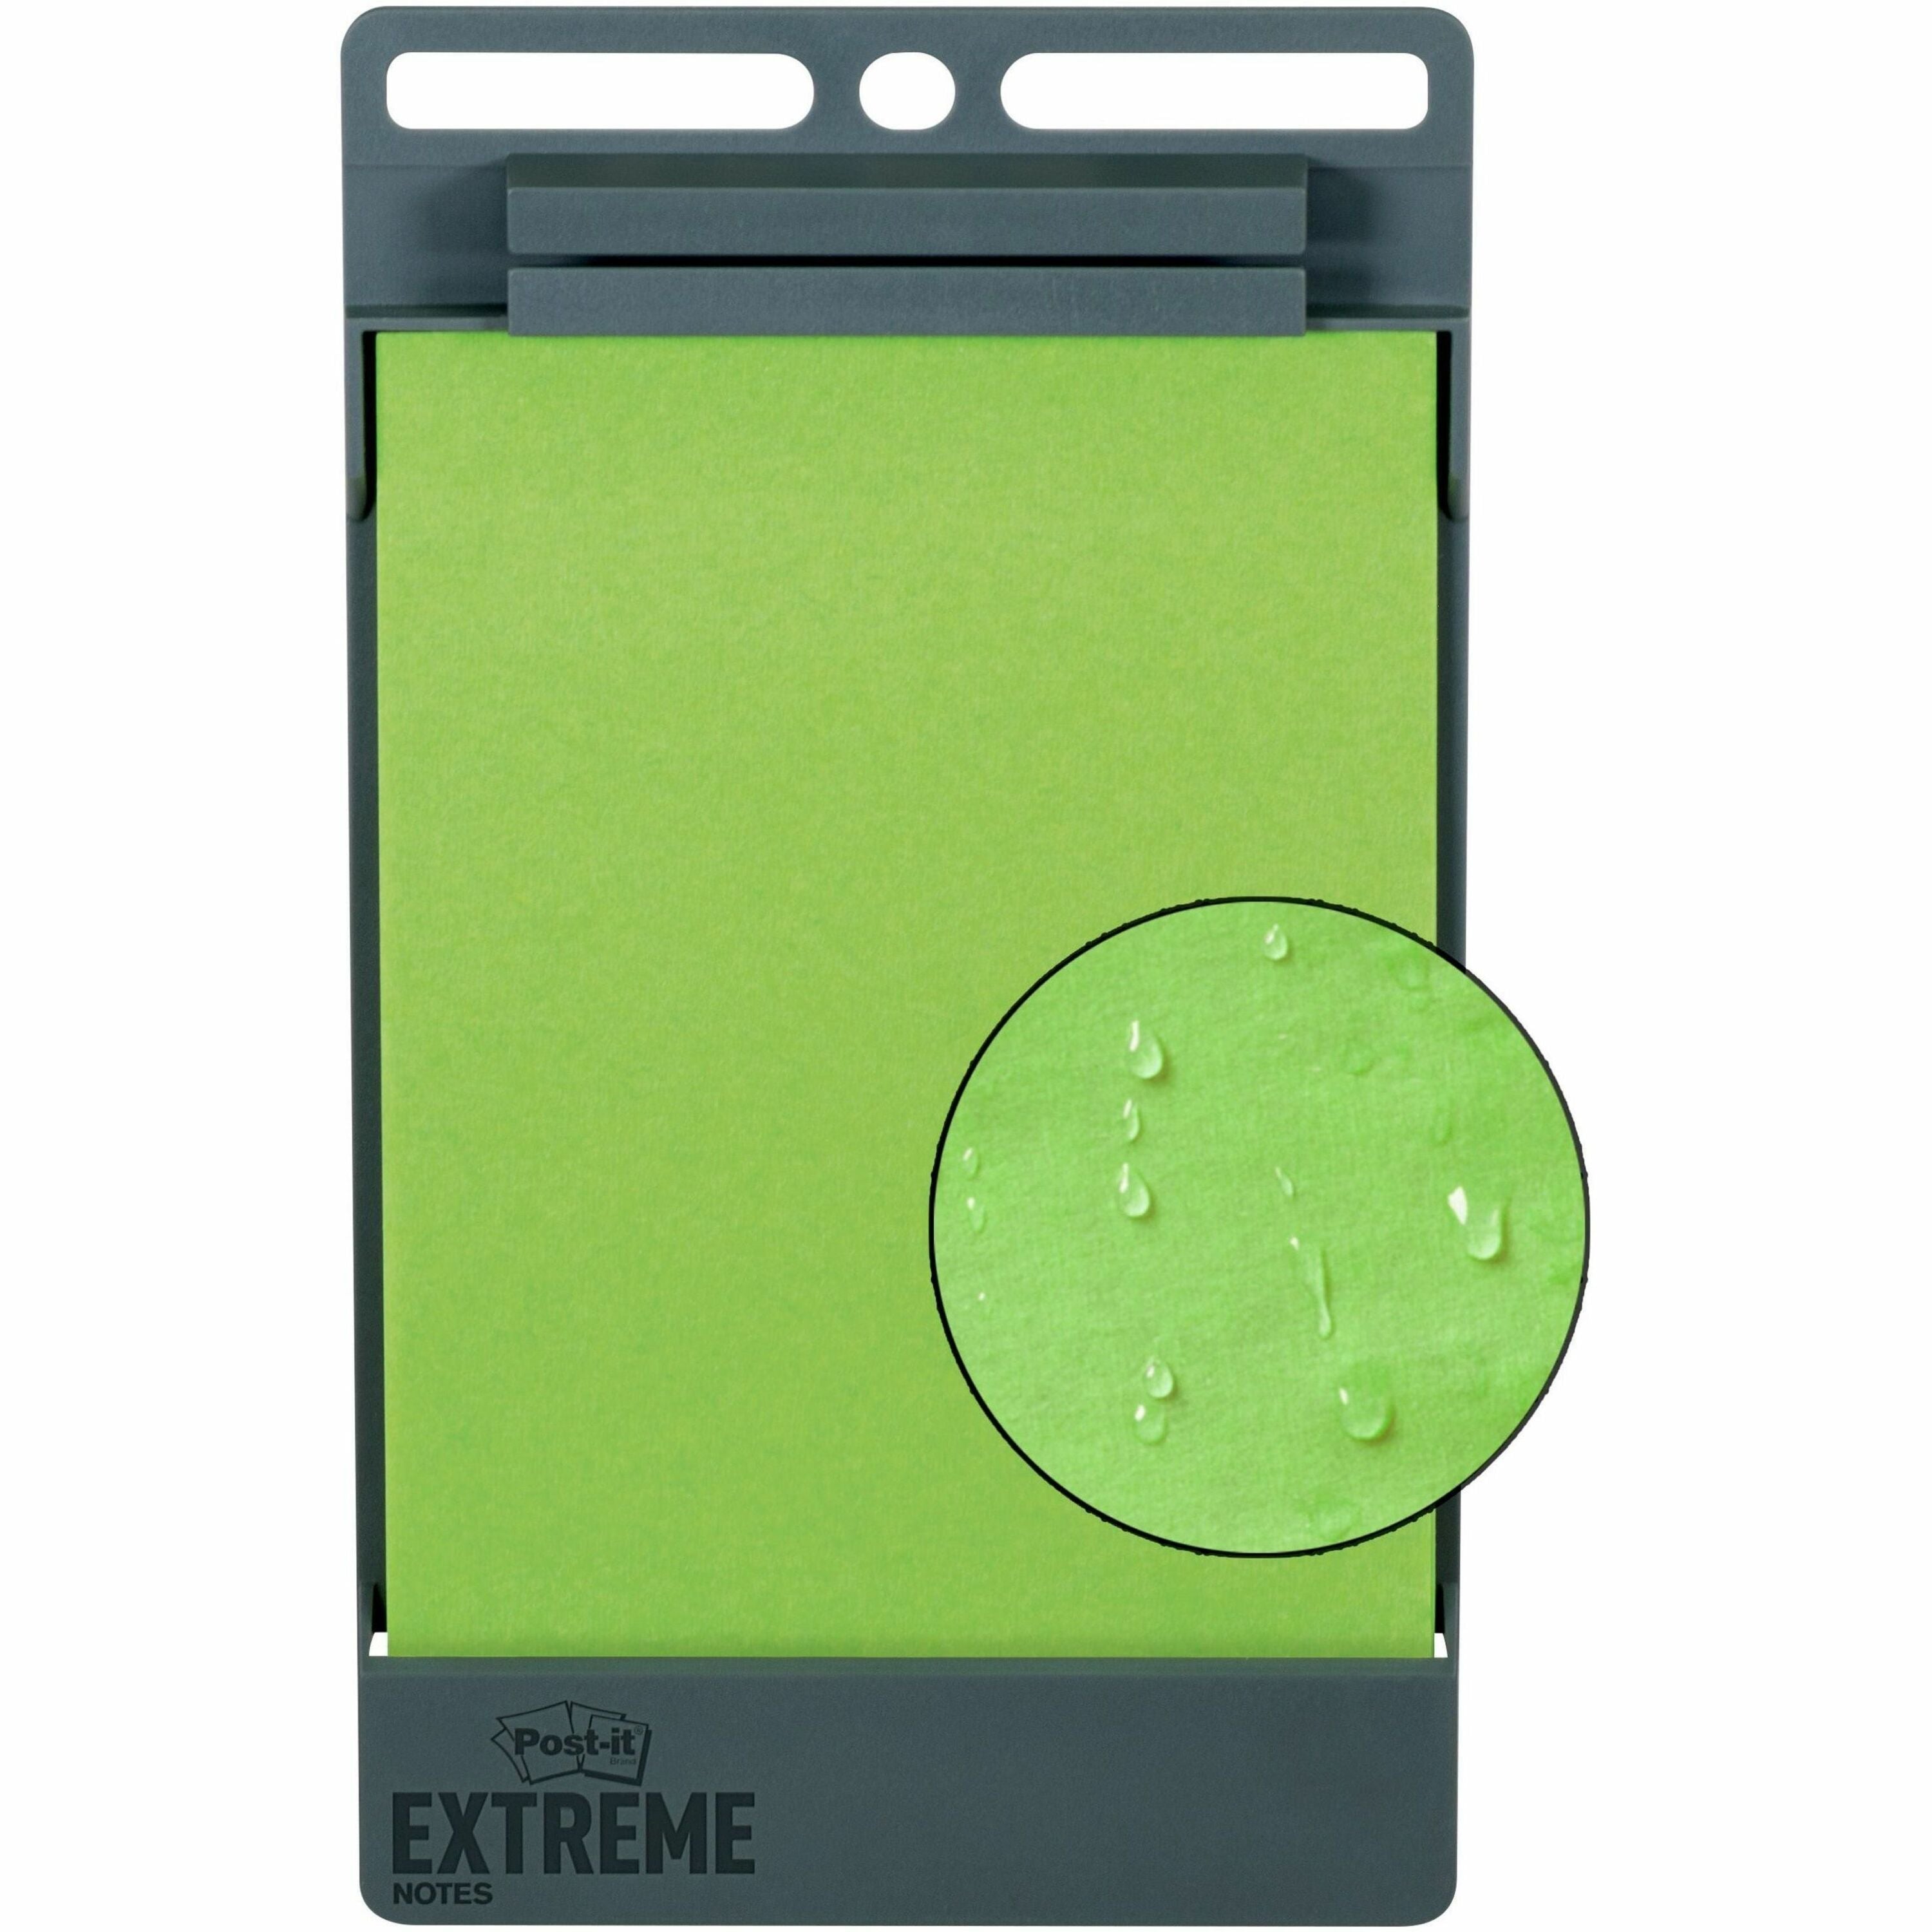 post-it-extreme-xl-notes-25-sheet-note-capacity-green_mmmxt456holder - 1